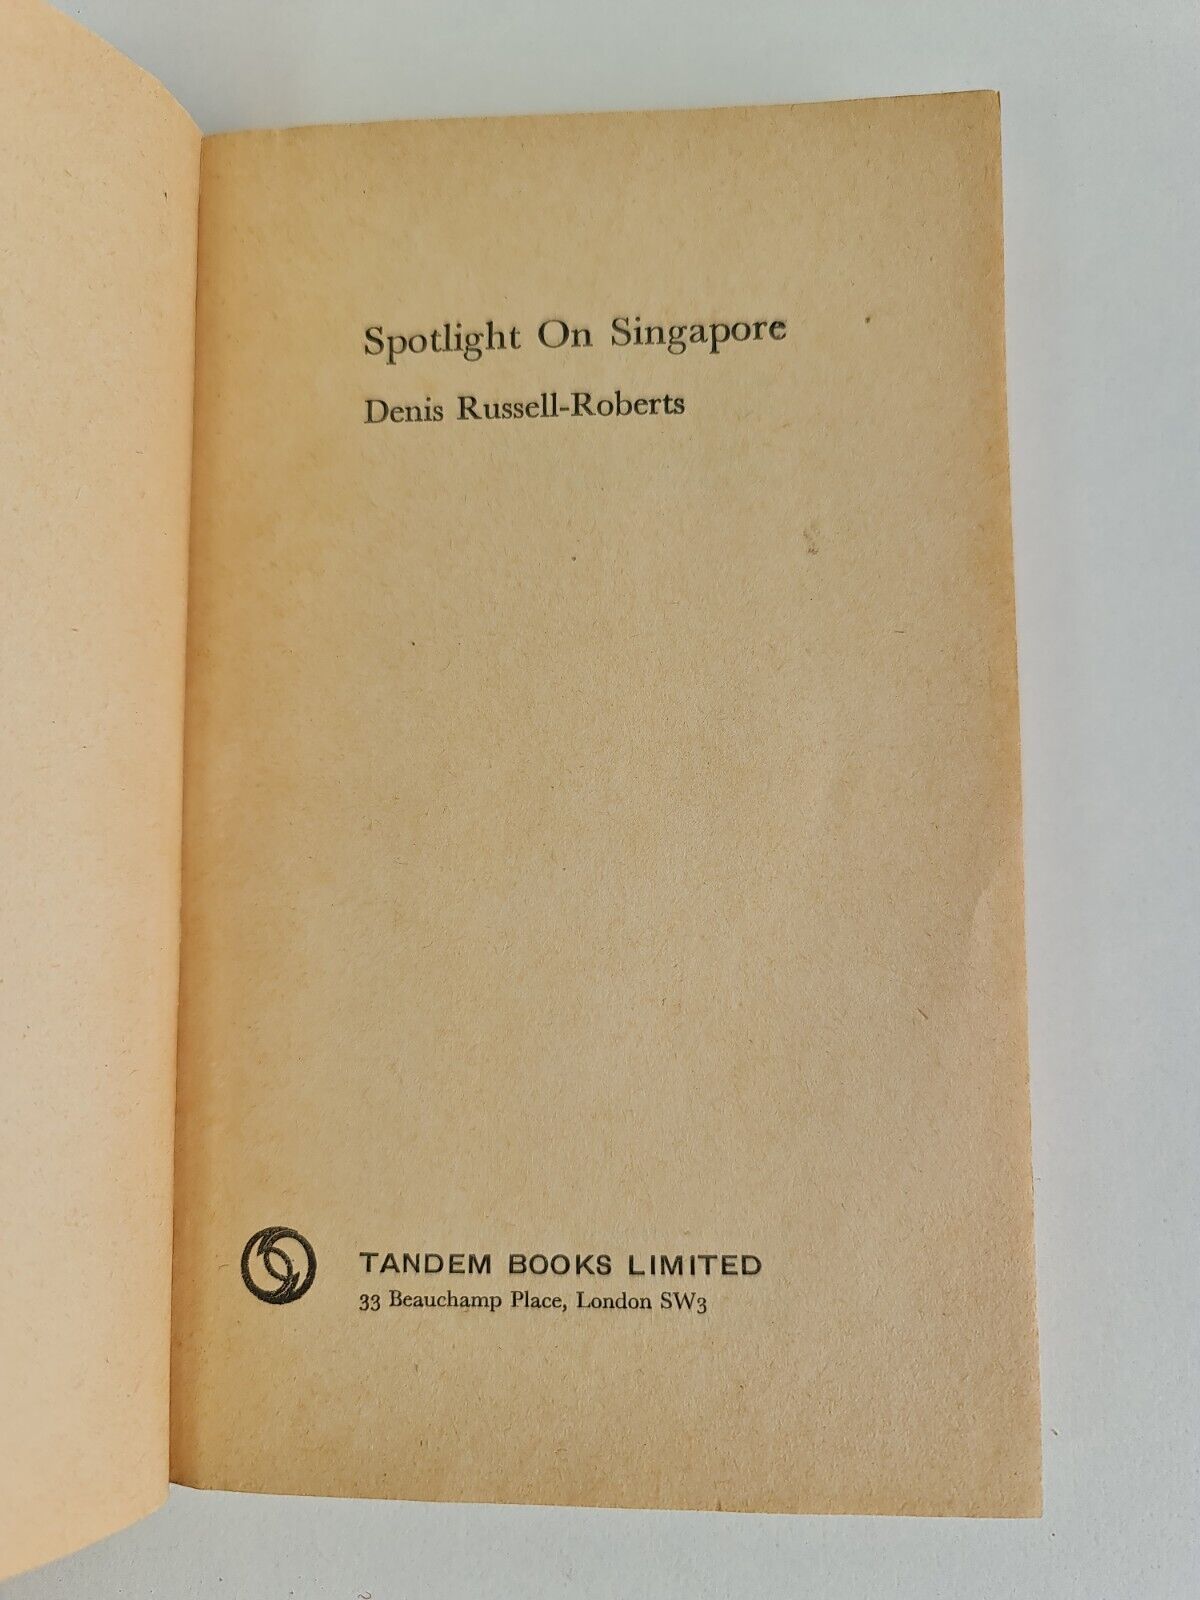 Spotlight on Singapore by Denis Russell-Roberts (1966 )